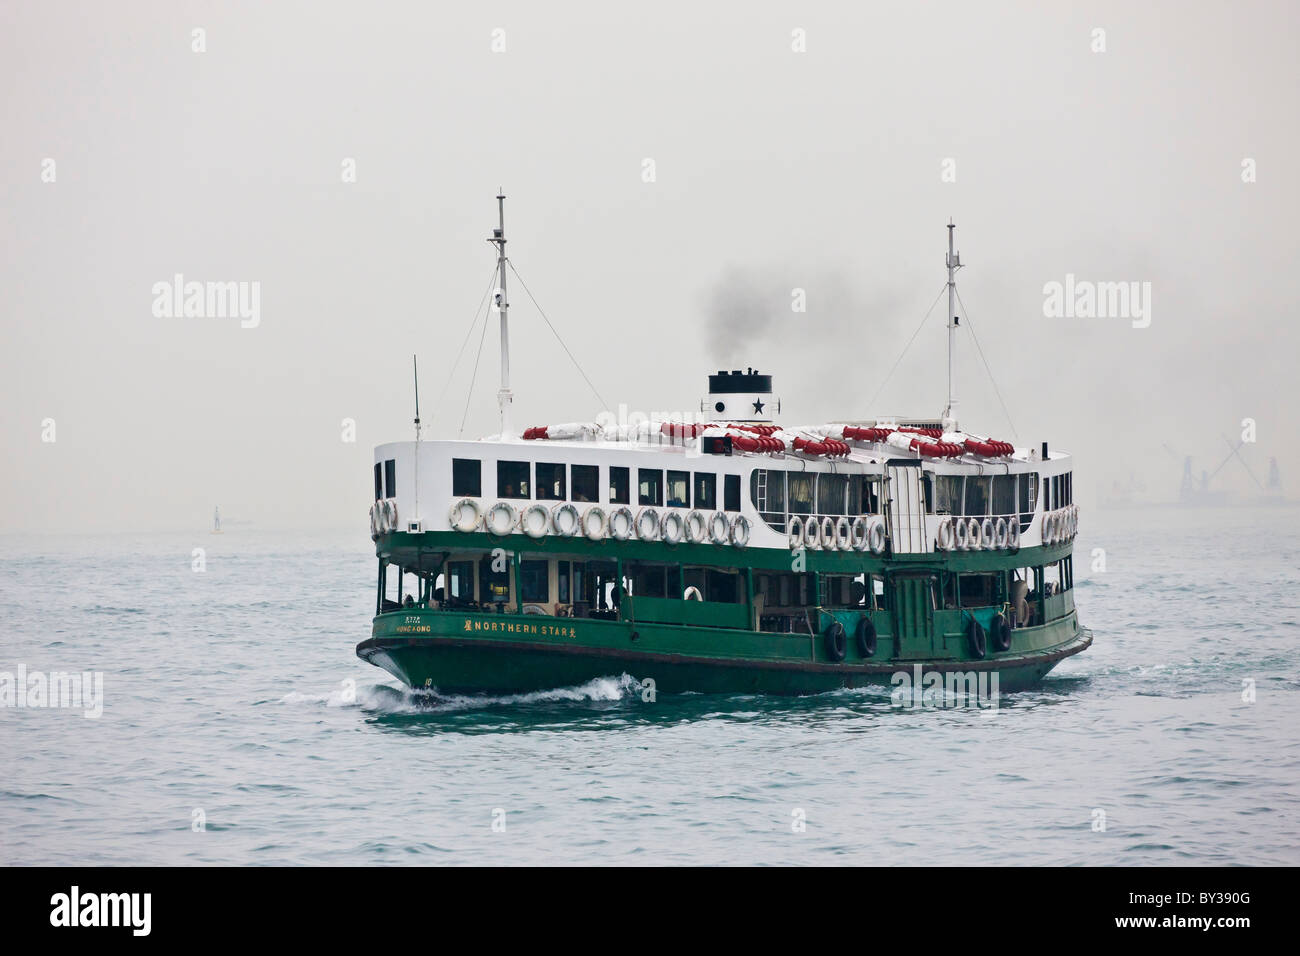 Star Ferry crossing Victoria Harbour between Kowloon and Hong Kong Island on typical hazy day. JMH4138 Stock Photo